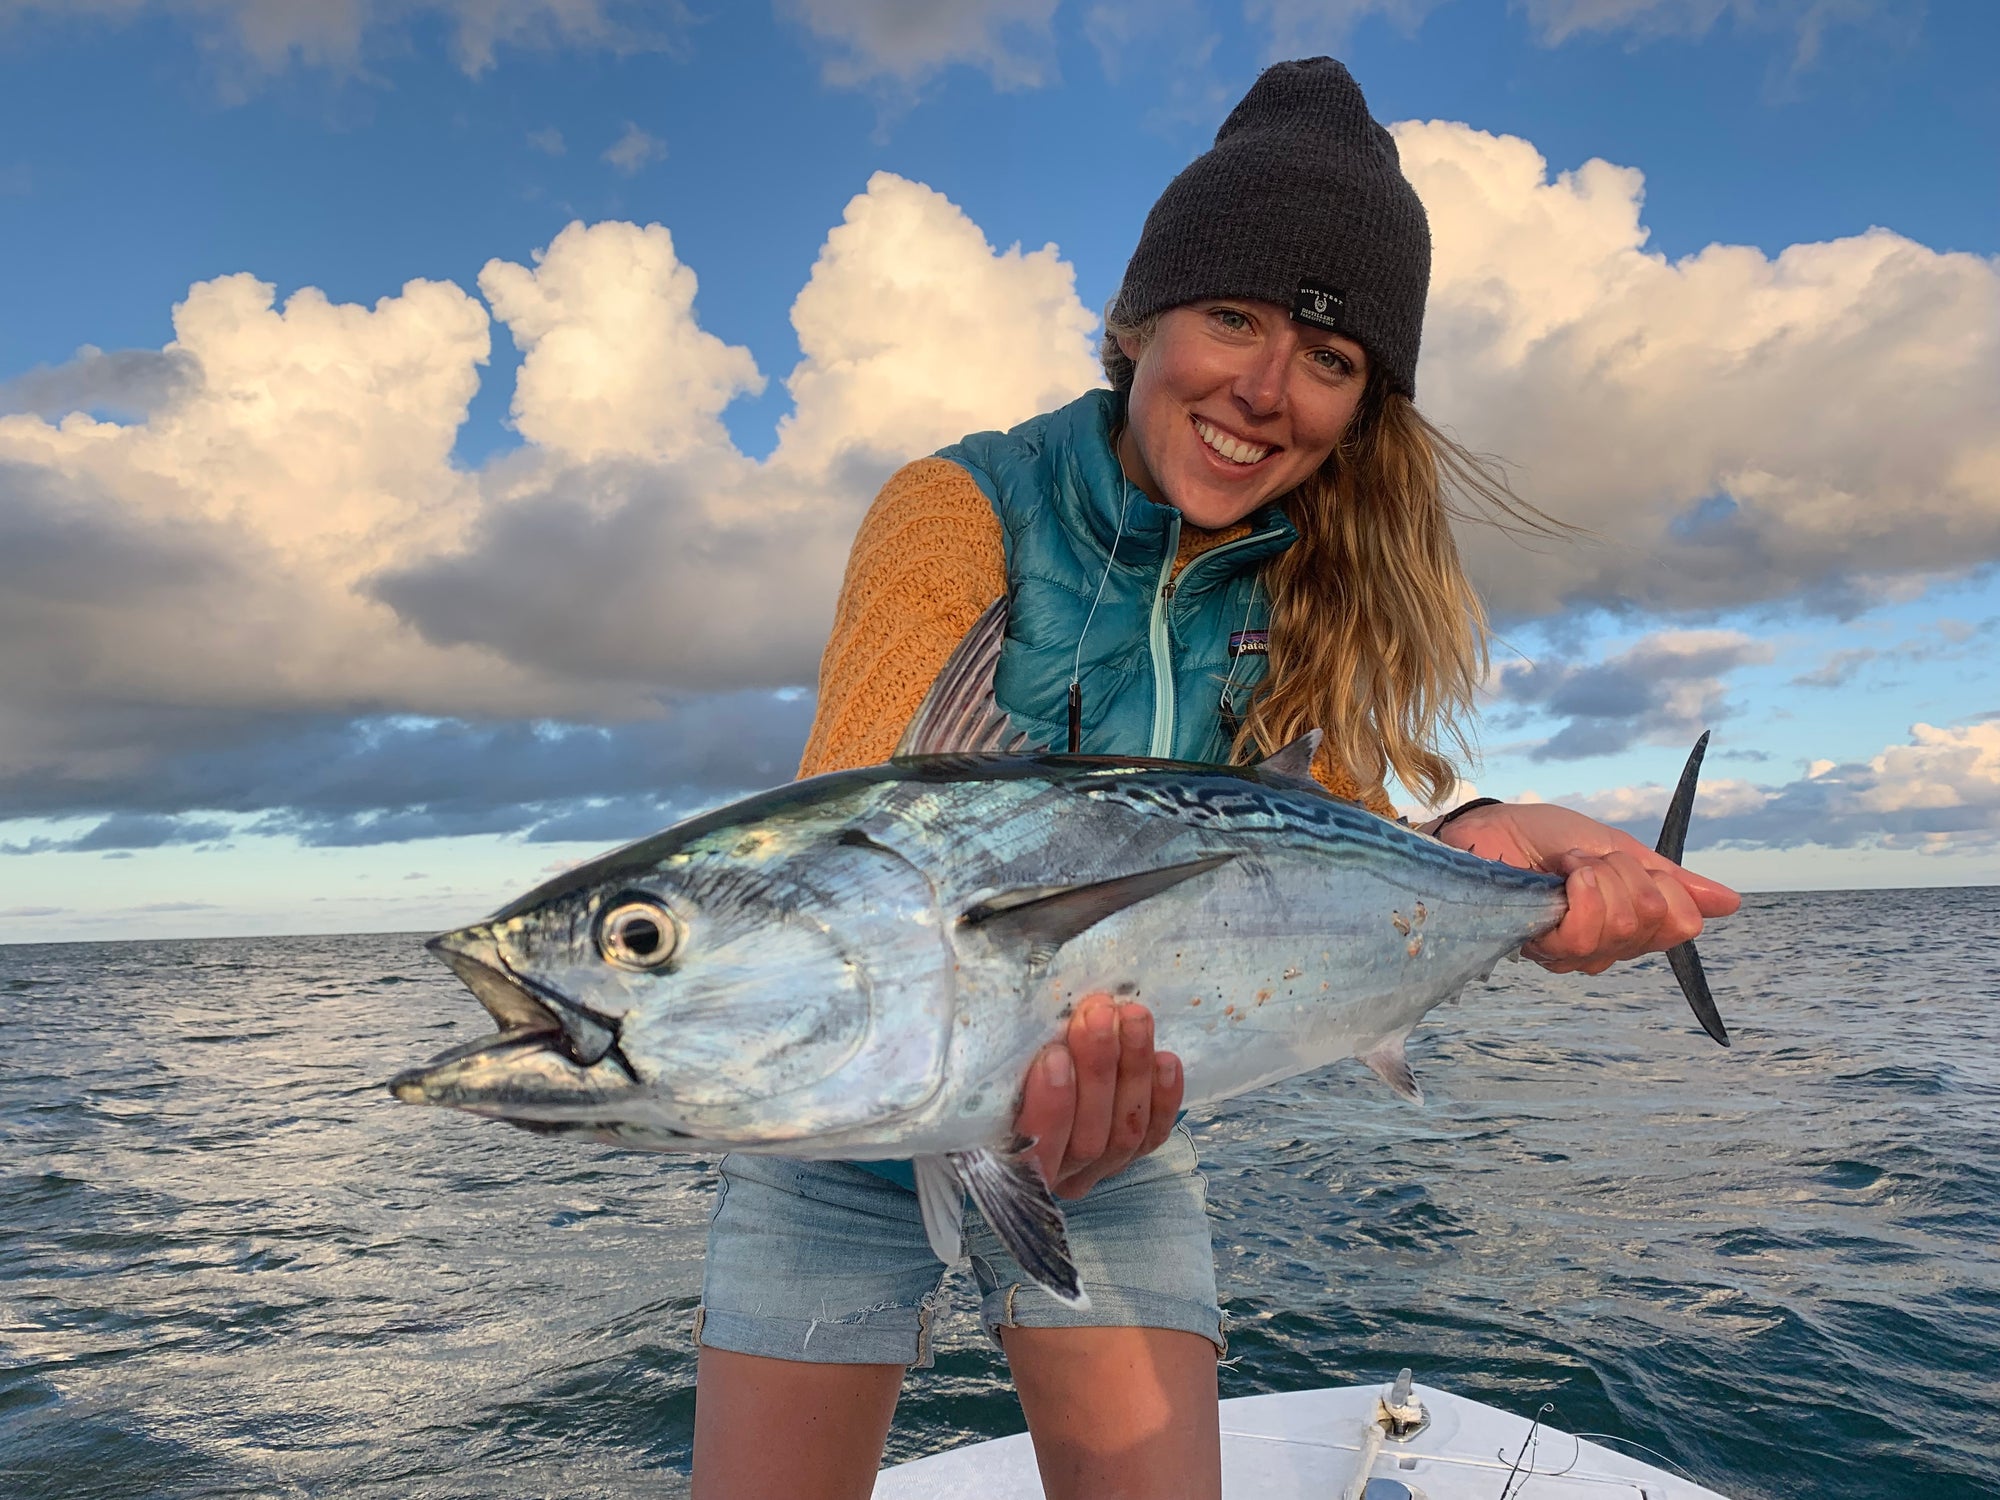 Abbie Schuster Discusses Women in Fly Fishing And Operating a